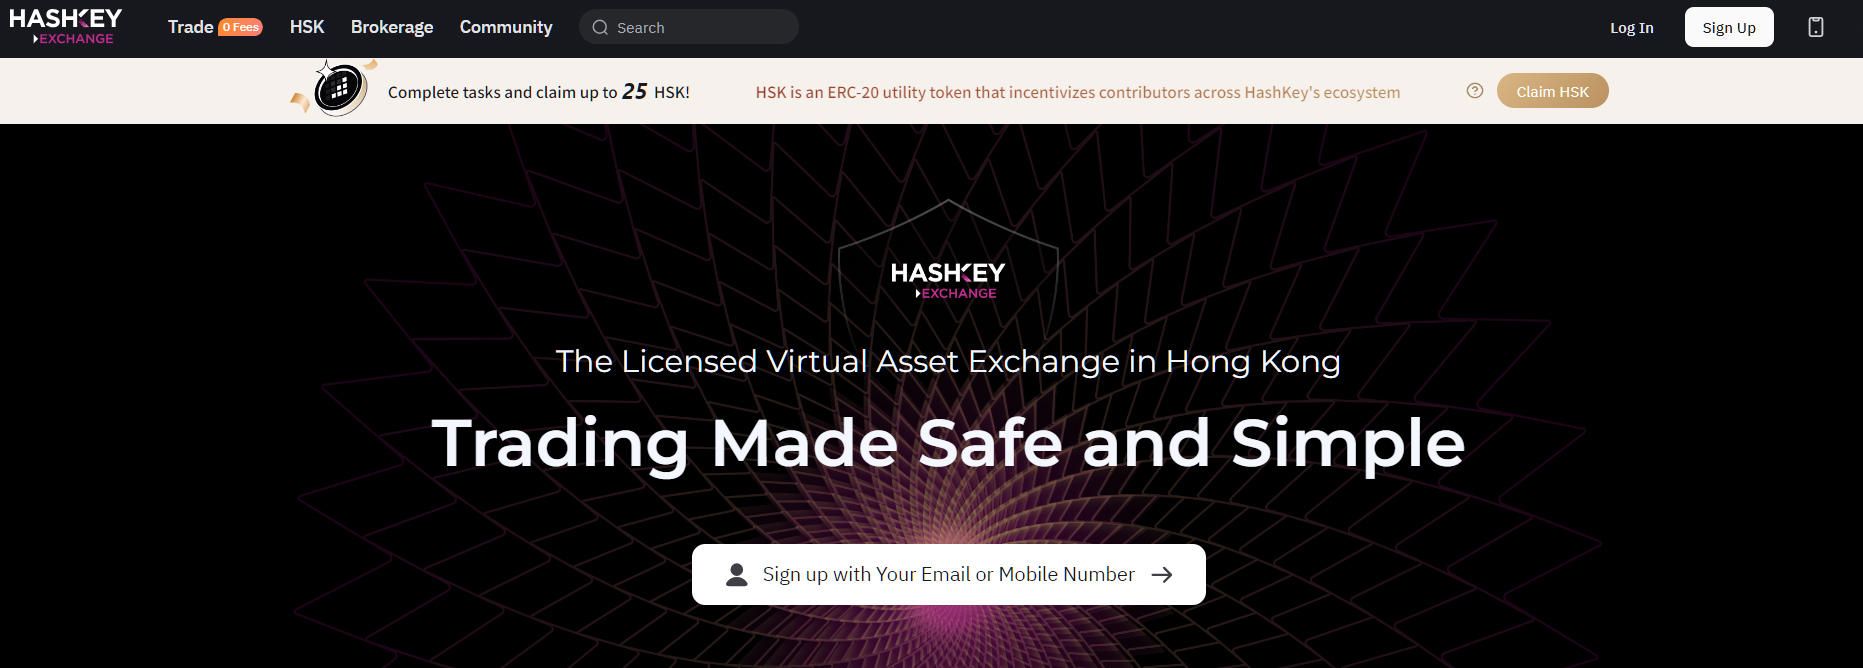 Hong Kongs first licensed crypto exchange HashKey is now live